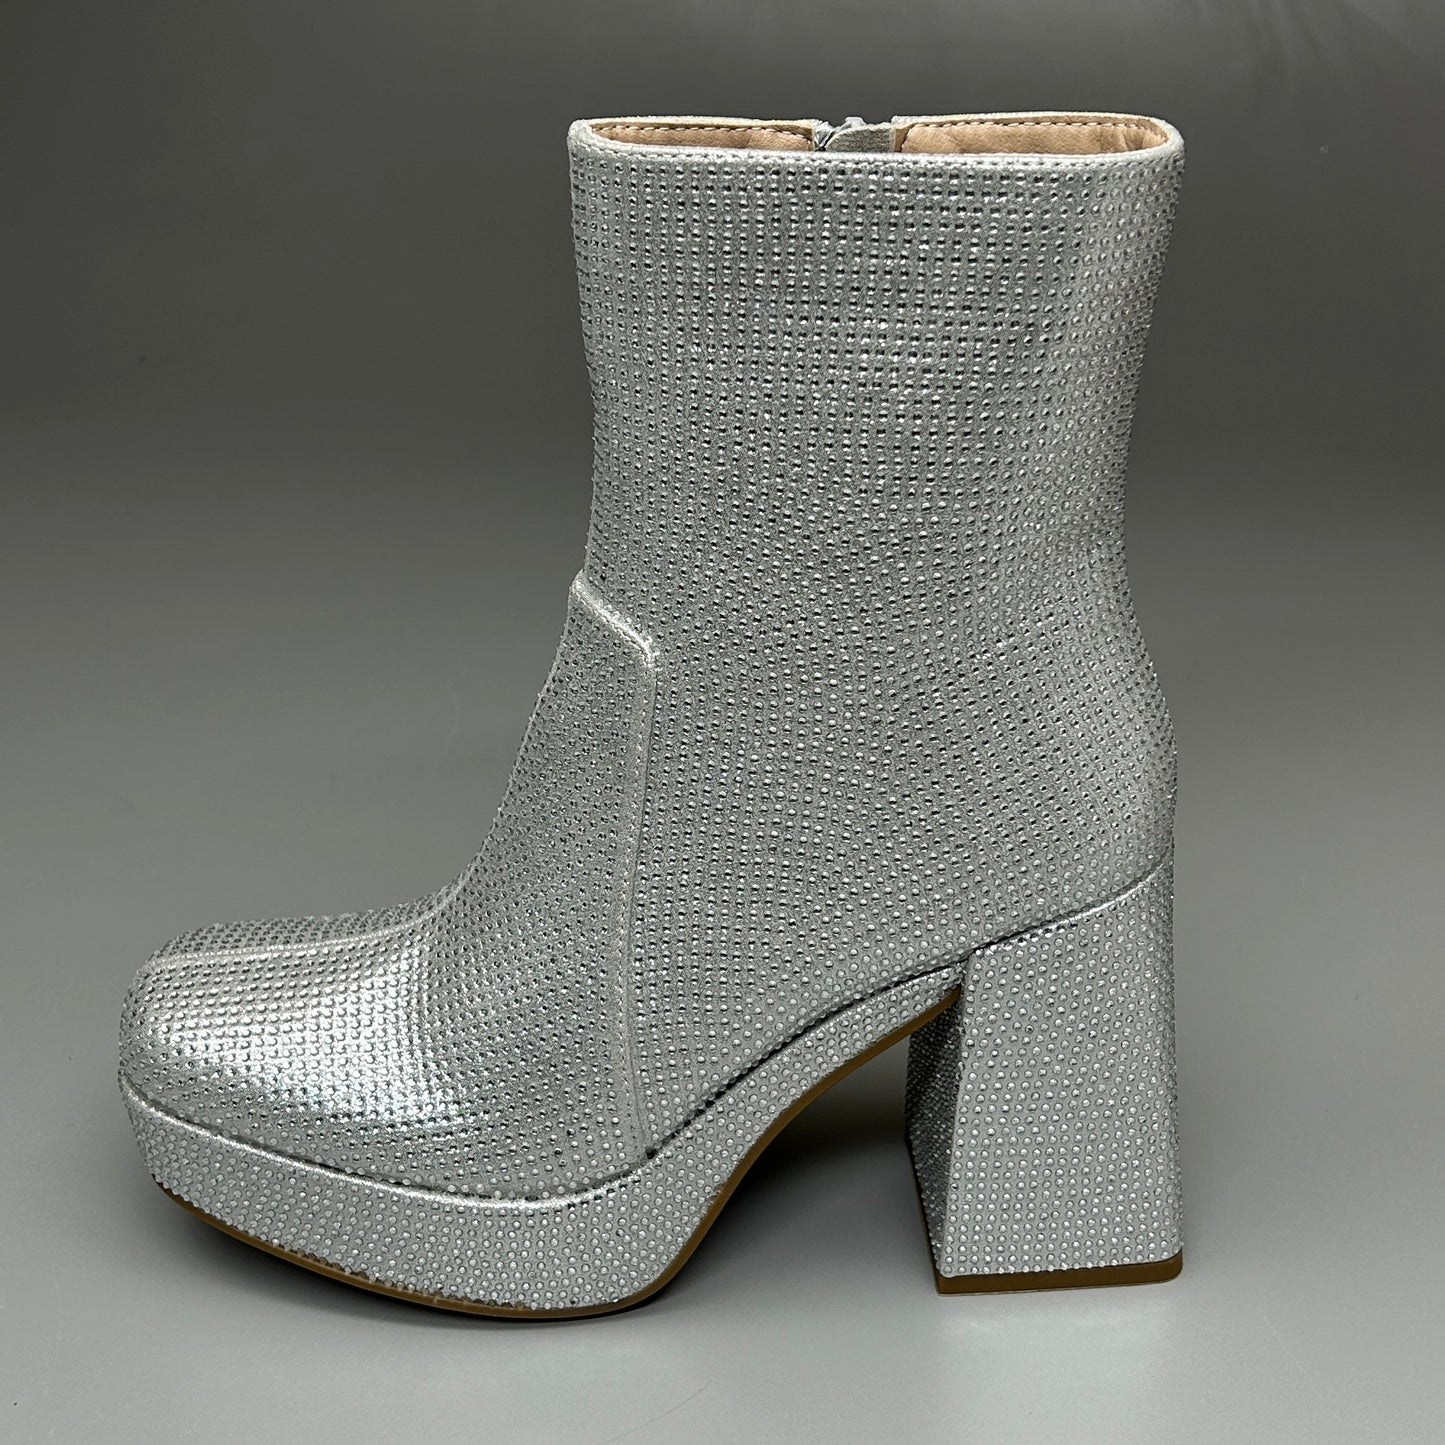 MIA Iva Silver Stone Heeled Boots Women's Sz 11 Silver GS1253108 (New)